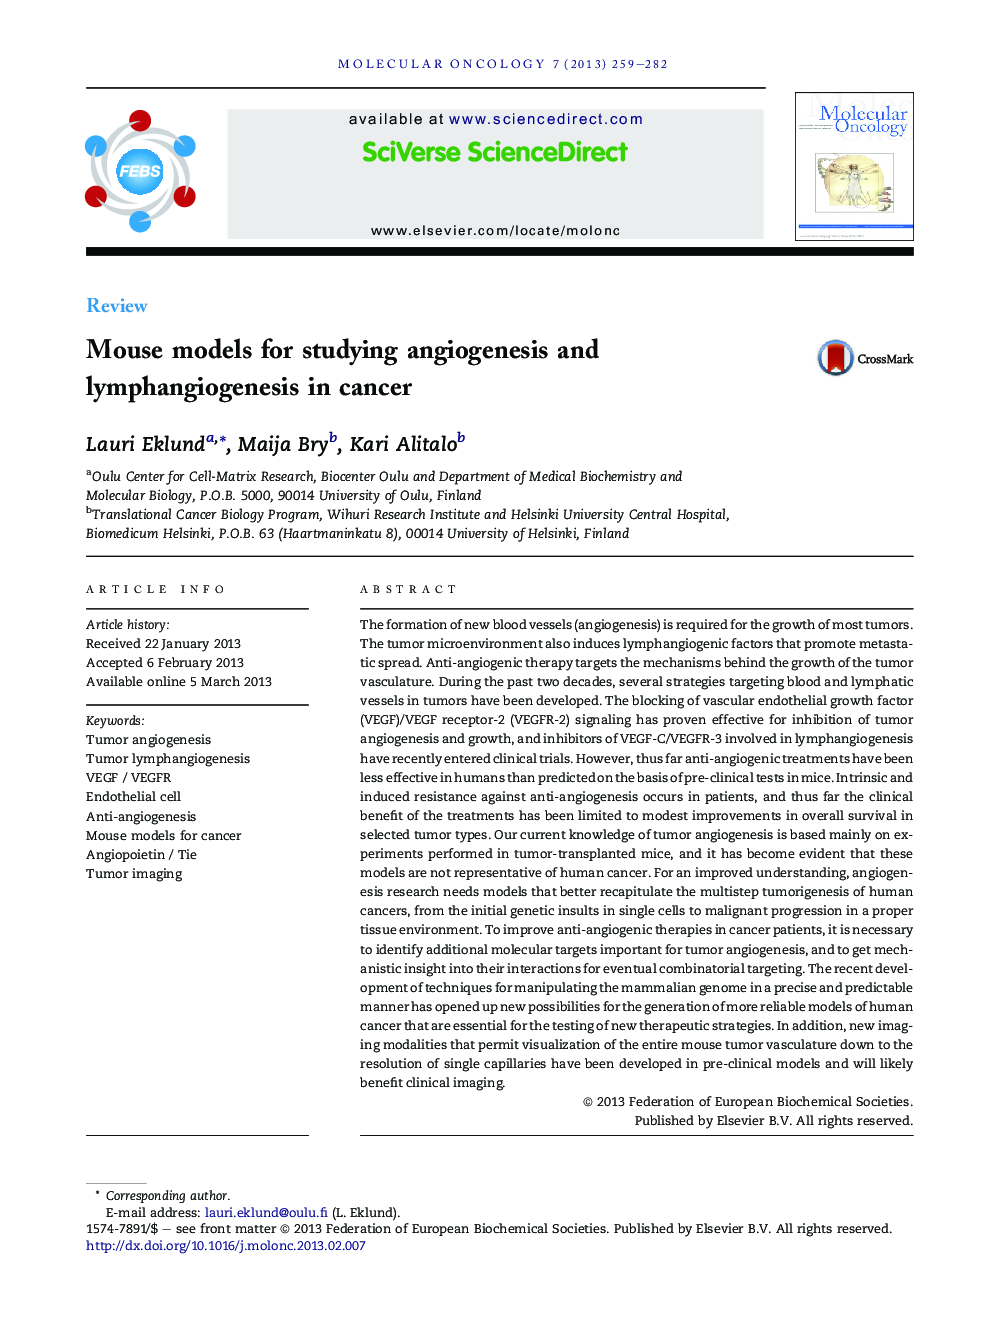 Mouse models for studying angiogenesis and lymphangiogenesis in cancer